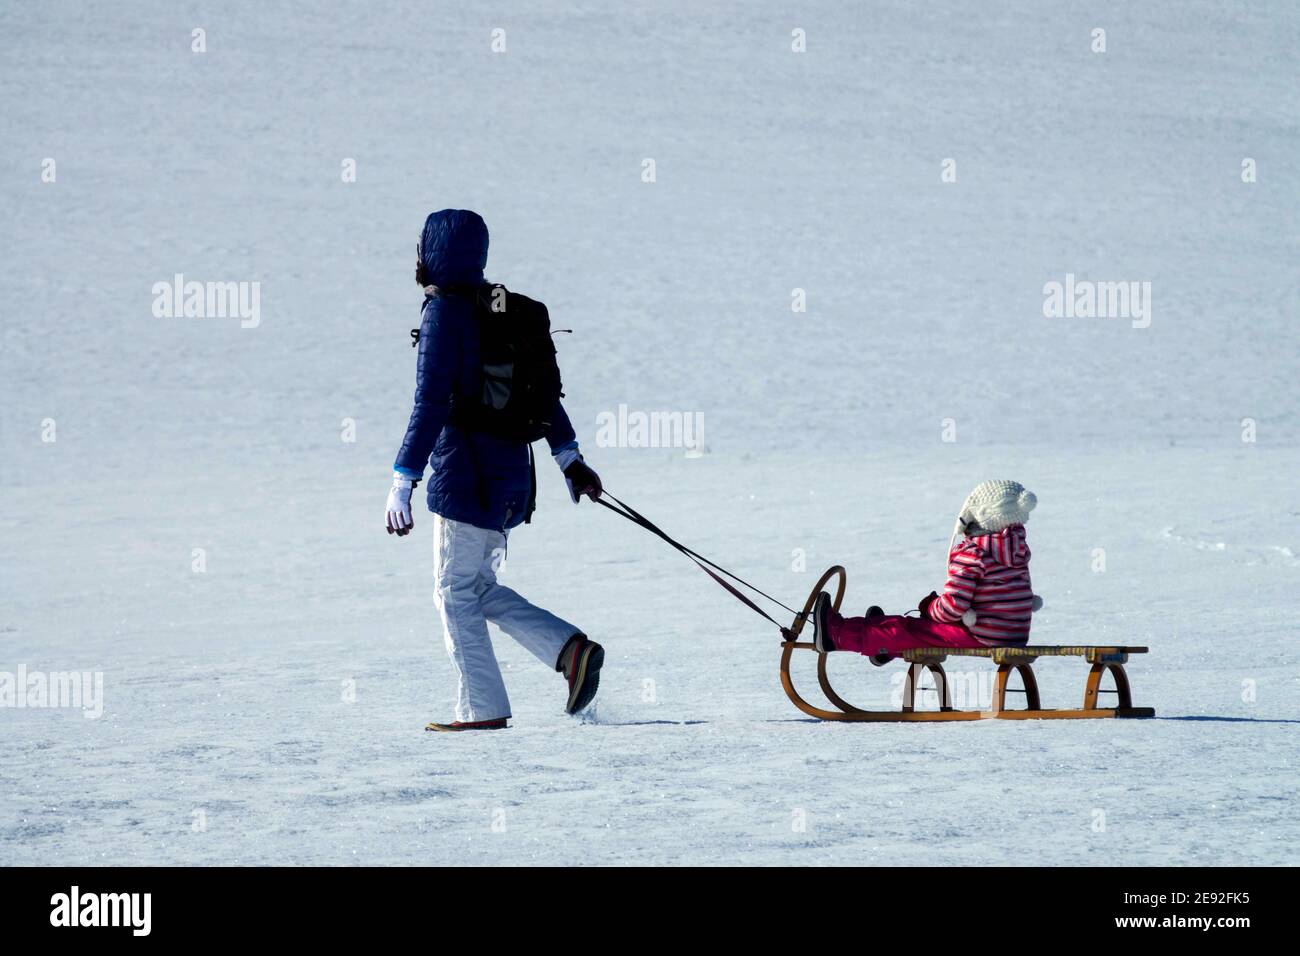 Sledding in winter, woman child on sledge, snow scenery woman and child Stock Photo